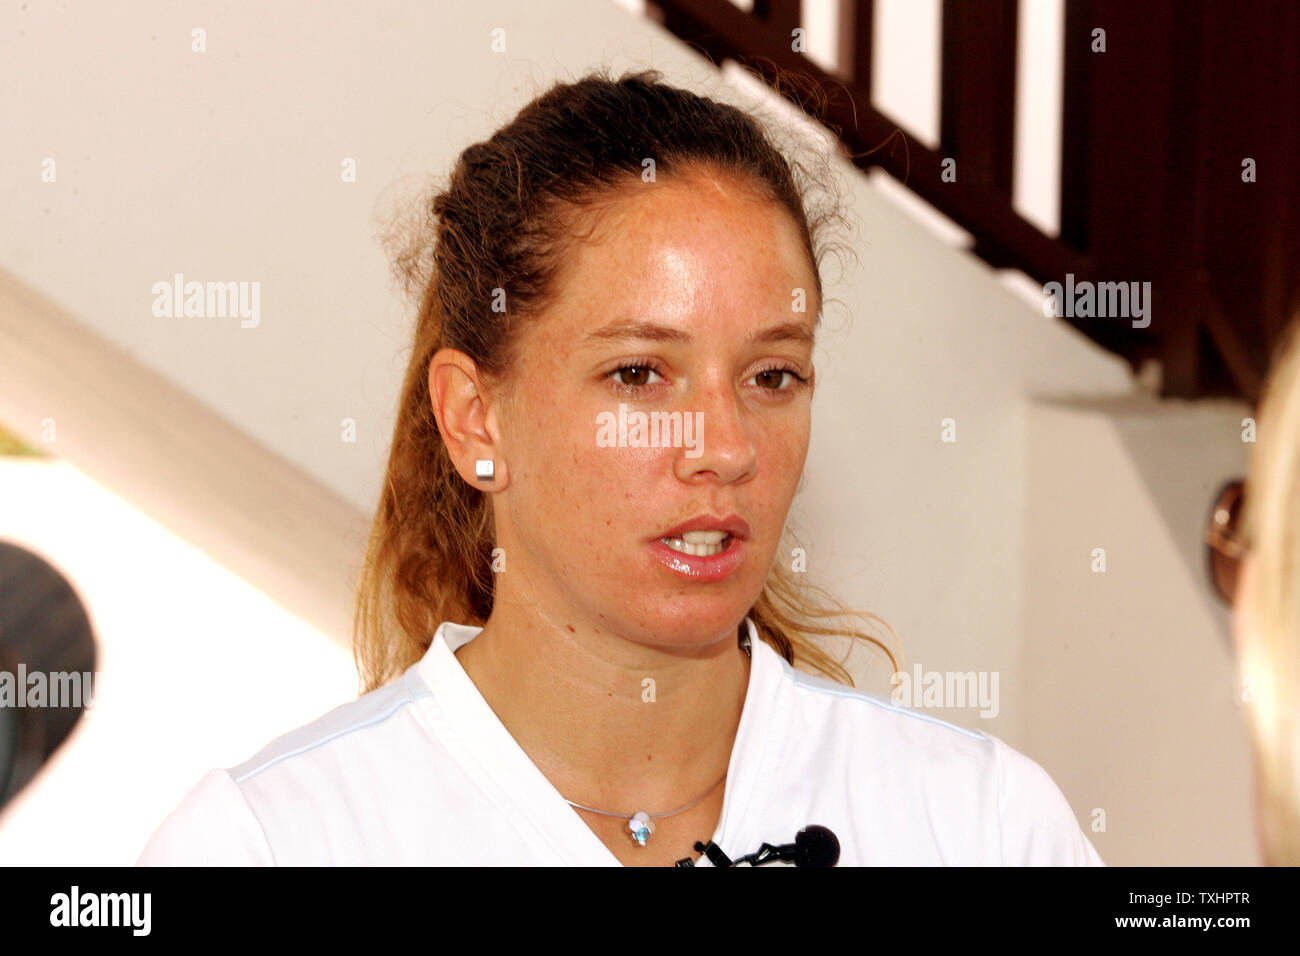 Patty Schnyder of Switzerland, currently 11th ranked on WTA Tour, answers questions during interviews on media day at Acura Classic women's tennis tournament, Carlsbad, California, USA on August 01, 2005.  Major seeded players Maria Sharapova and Serena Williams have withdrawn due to injuries. While Svetlana Kuznetsova, Lindsay Davenport and Kim Clijsters begin competing this week with finals on August 7, 2005. (UPI Photo/Tom Theobald) Stock Photo